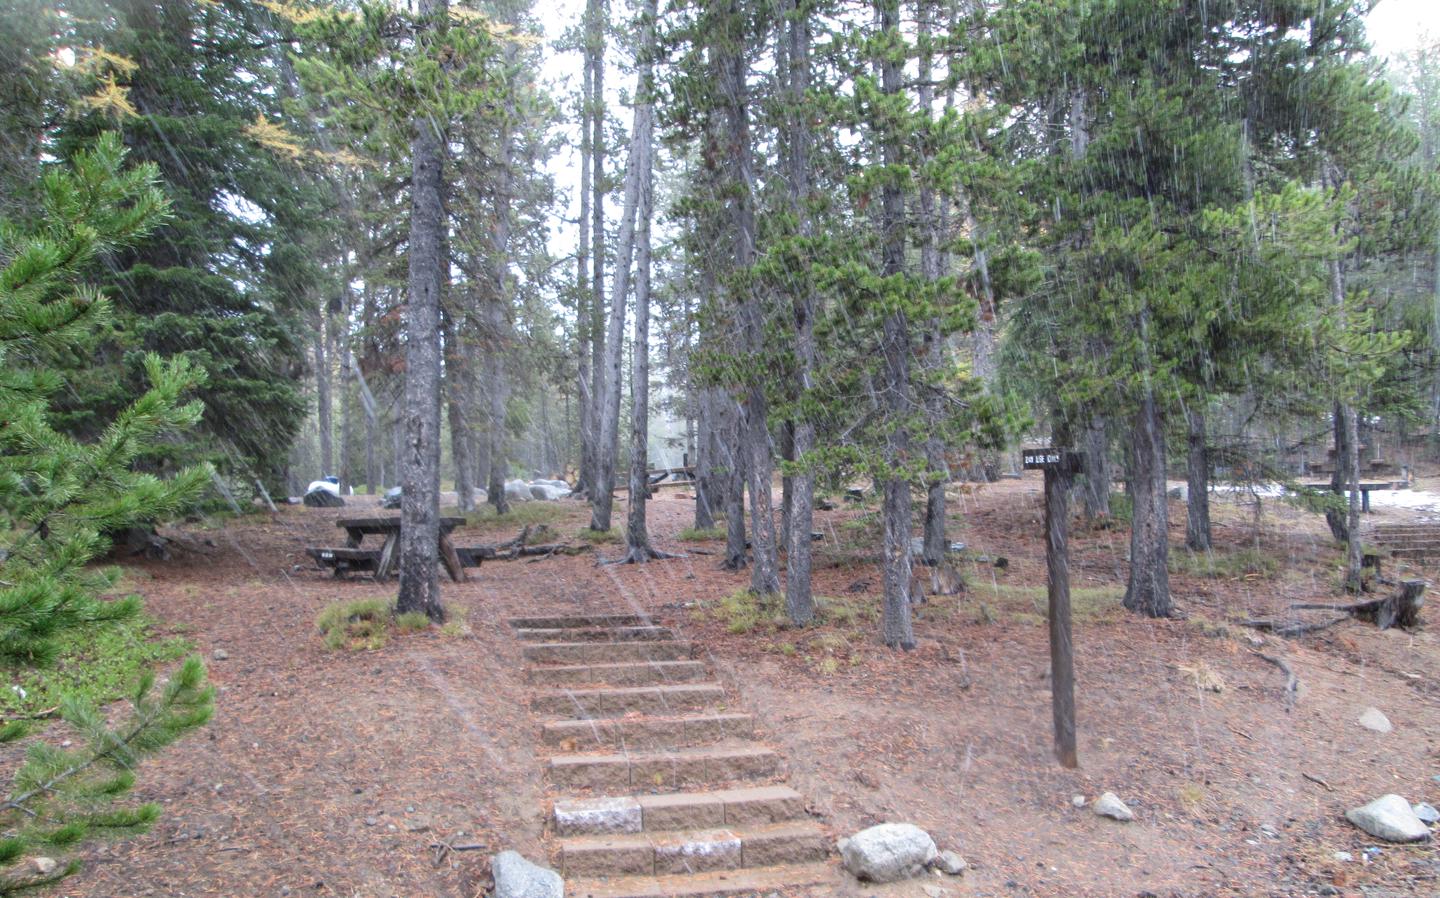 cement block stairs leading to day use site with picnic tableOlive Lake Campground upper day-use site